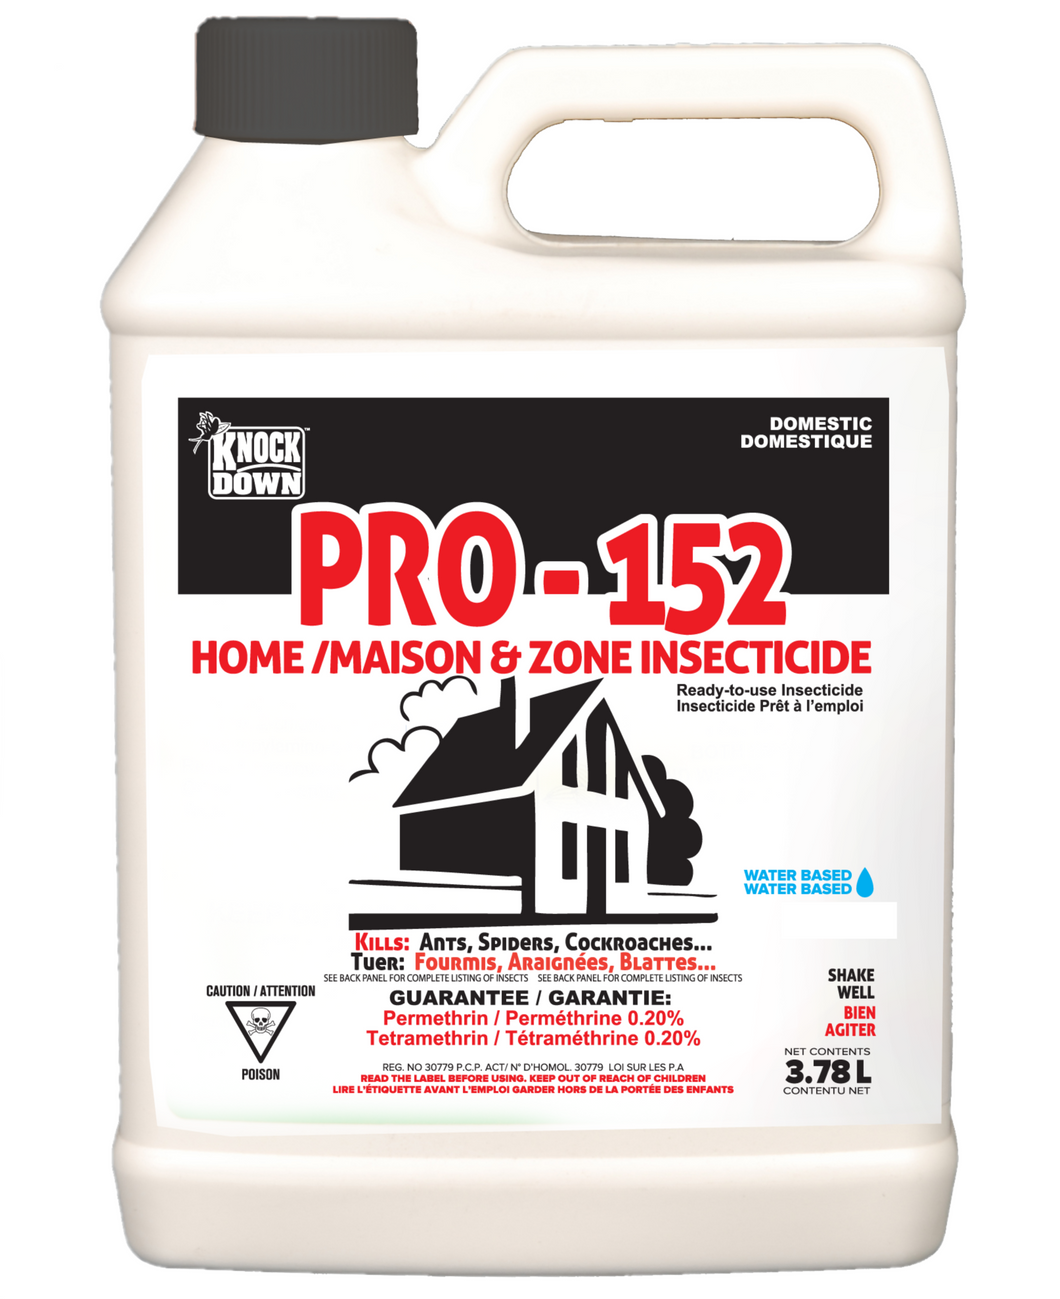 CHS KD Knock Down Pro-152 RTU (3.78L Gallon) ready-to-use Domestic Insecticide for both Indoors and outdoors on the surface of building, porches, patios and decks. Controls Ants, Carpet Beetles, Cockroaches, Crickets, Earwigs, fleas, Silverfish, Sowbugs, Spiders, Brown Dog Ticks, Flies and Mosquitoes